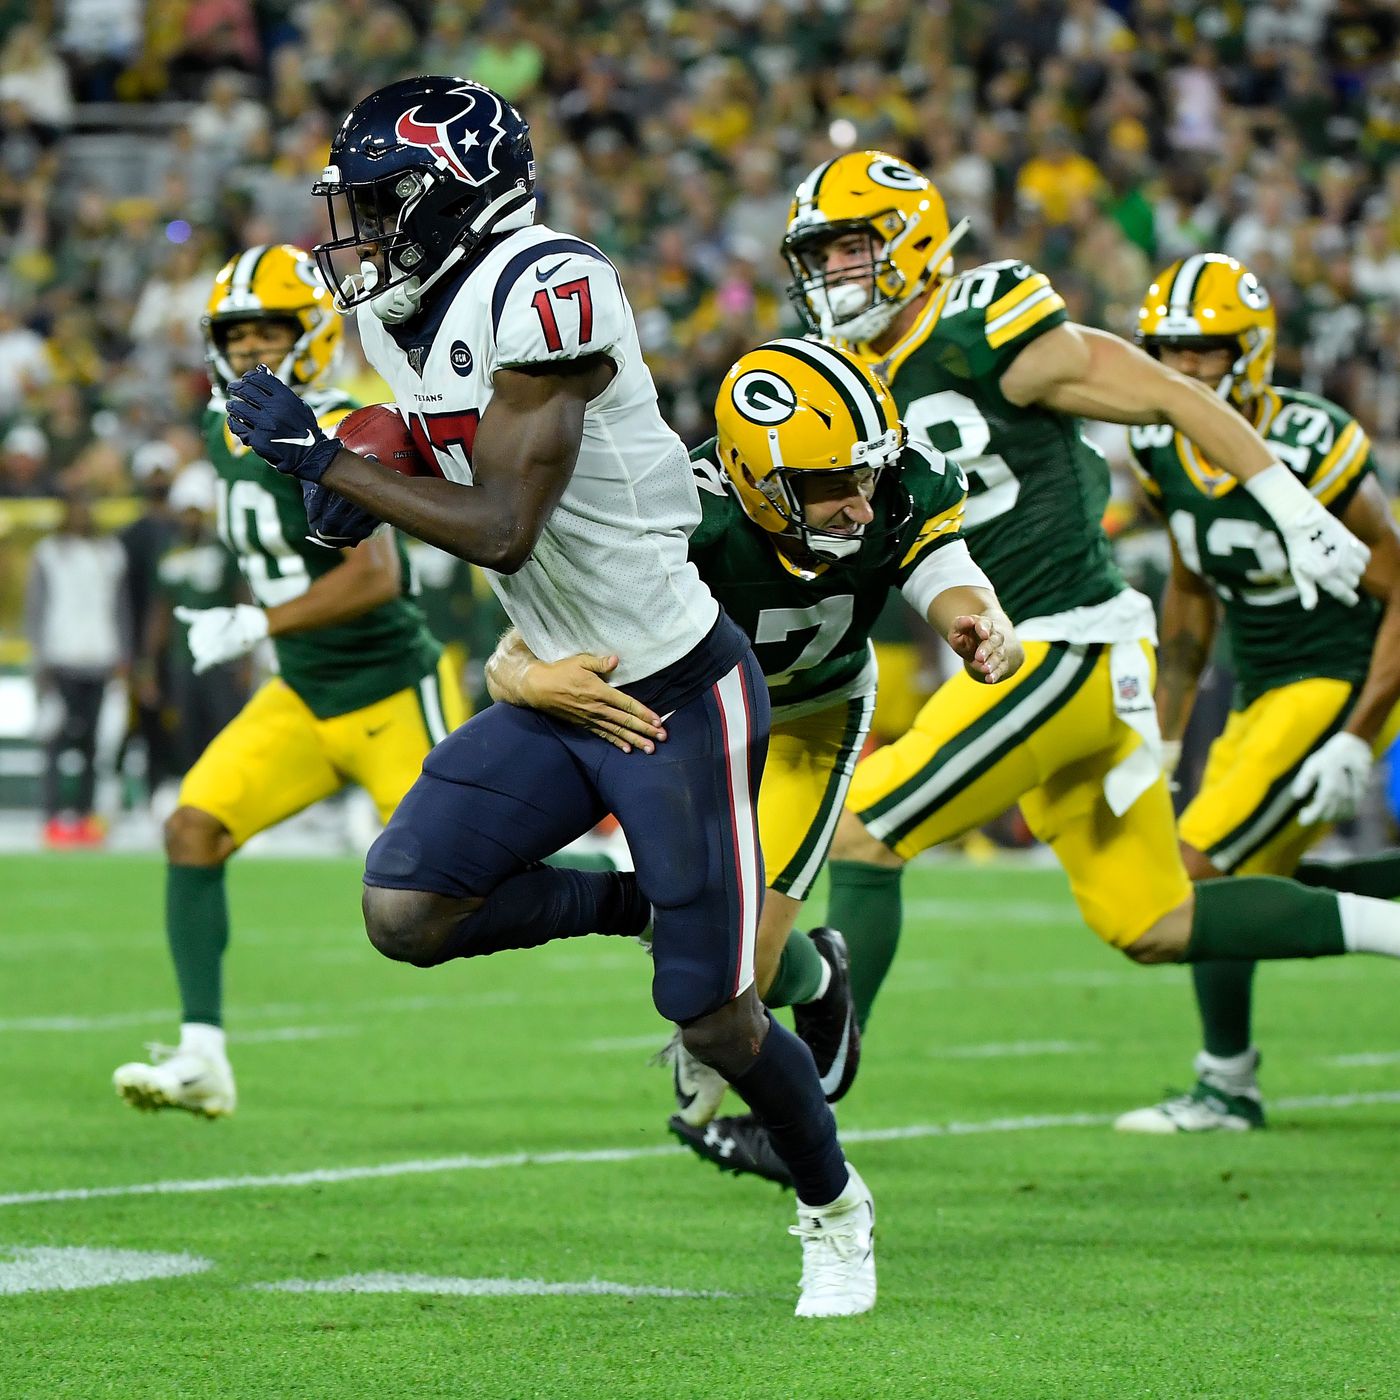 Packers vs. Texans, Preseason 2021: Game time, TV broadcast, online  streaming, & more - Acme Packing Company